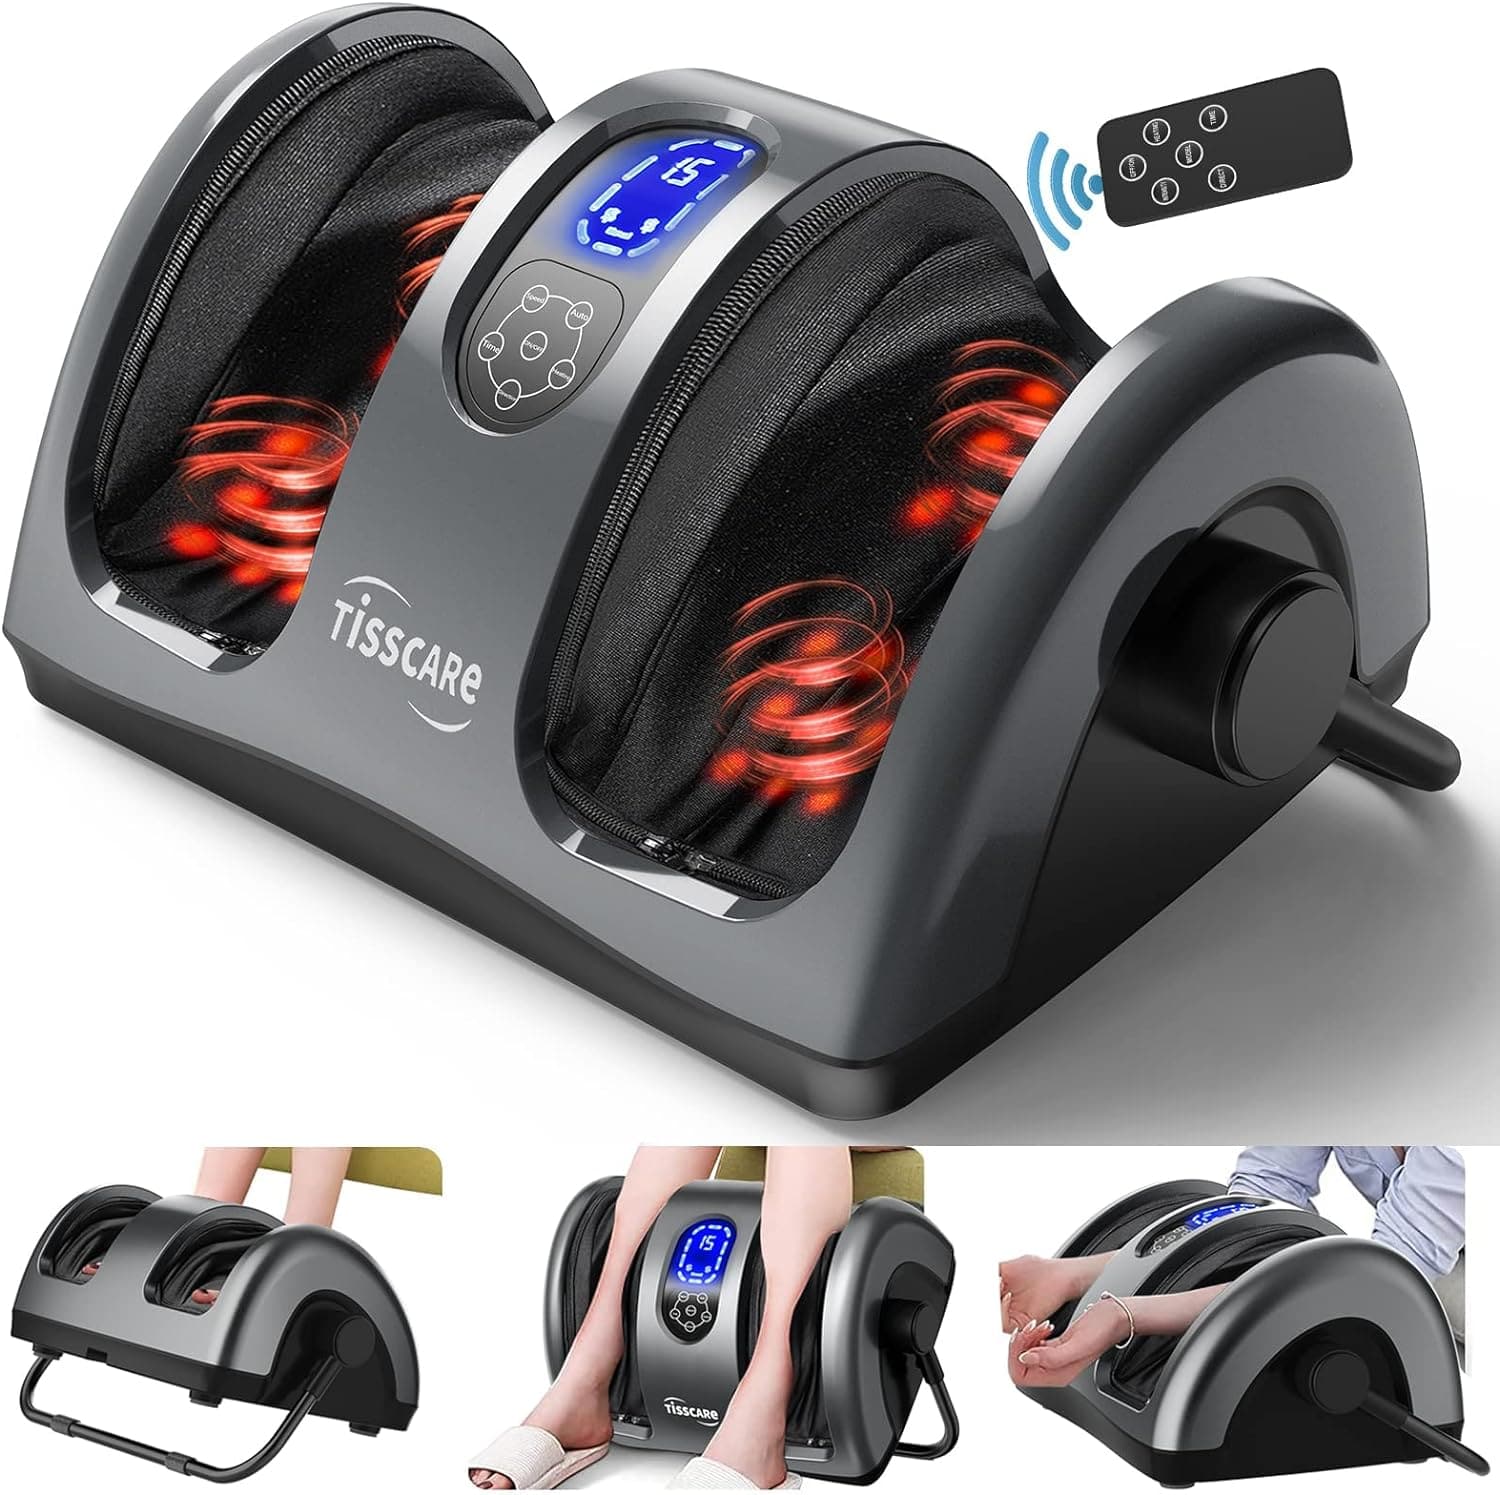 The Best Foot Massagers